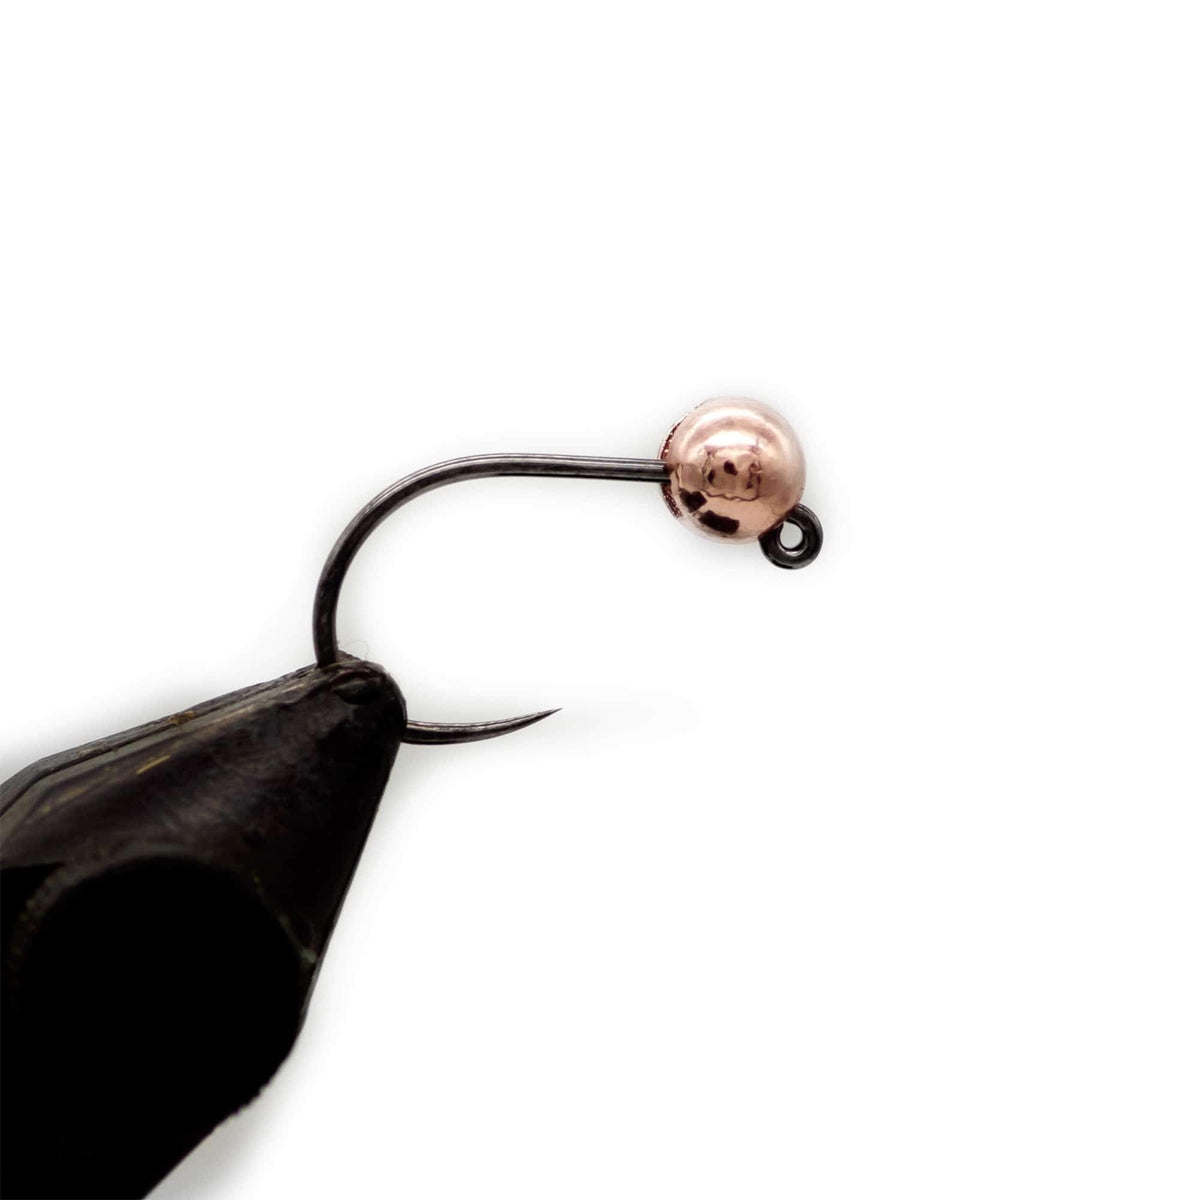 A Hanak competition 4.0mm slotted metallic+ tungsten bead on a size 12 Hanak 450BL Jig Hook for fly tying